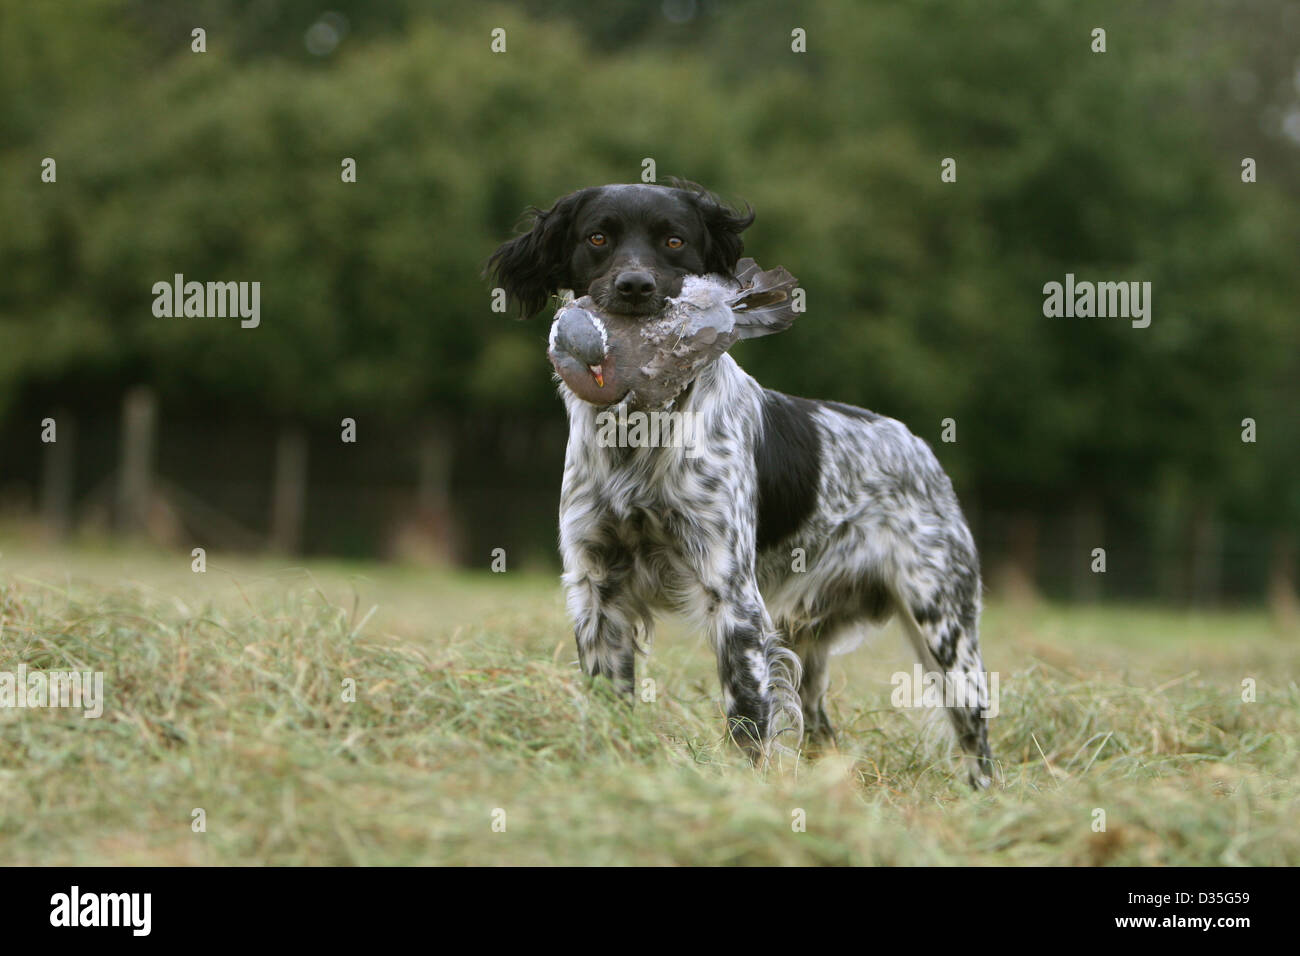 Dog Brittany Spaniel / Epagneul breton  adult (black and white) standing with a pigeon in its mouth Stock Photo